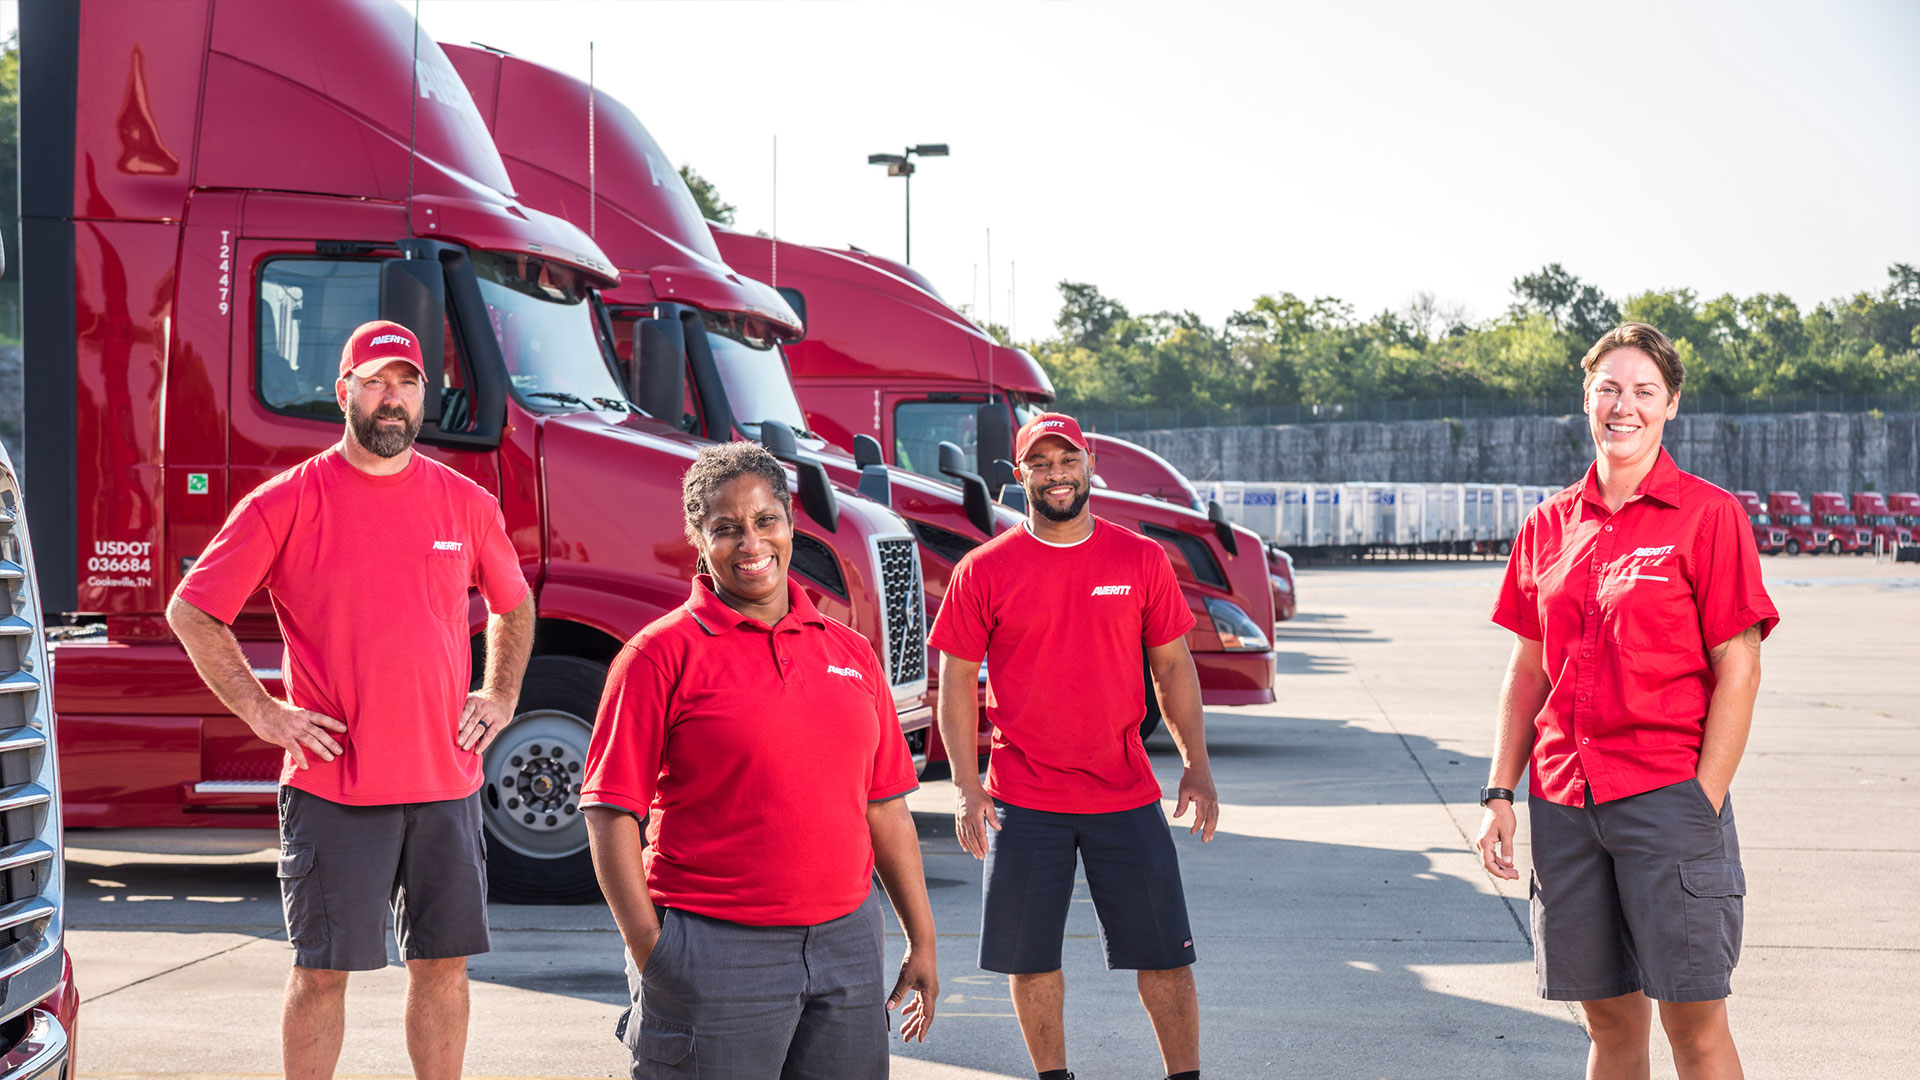 Averitt's drivers named to the Top 100 Truck Drivers List for 2021